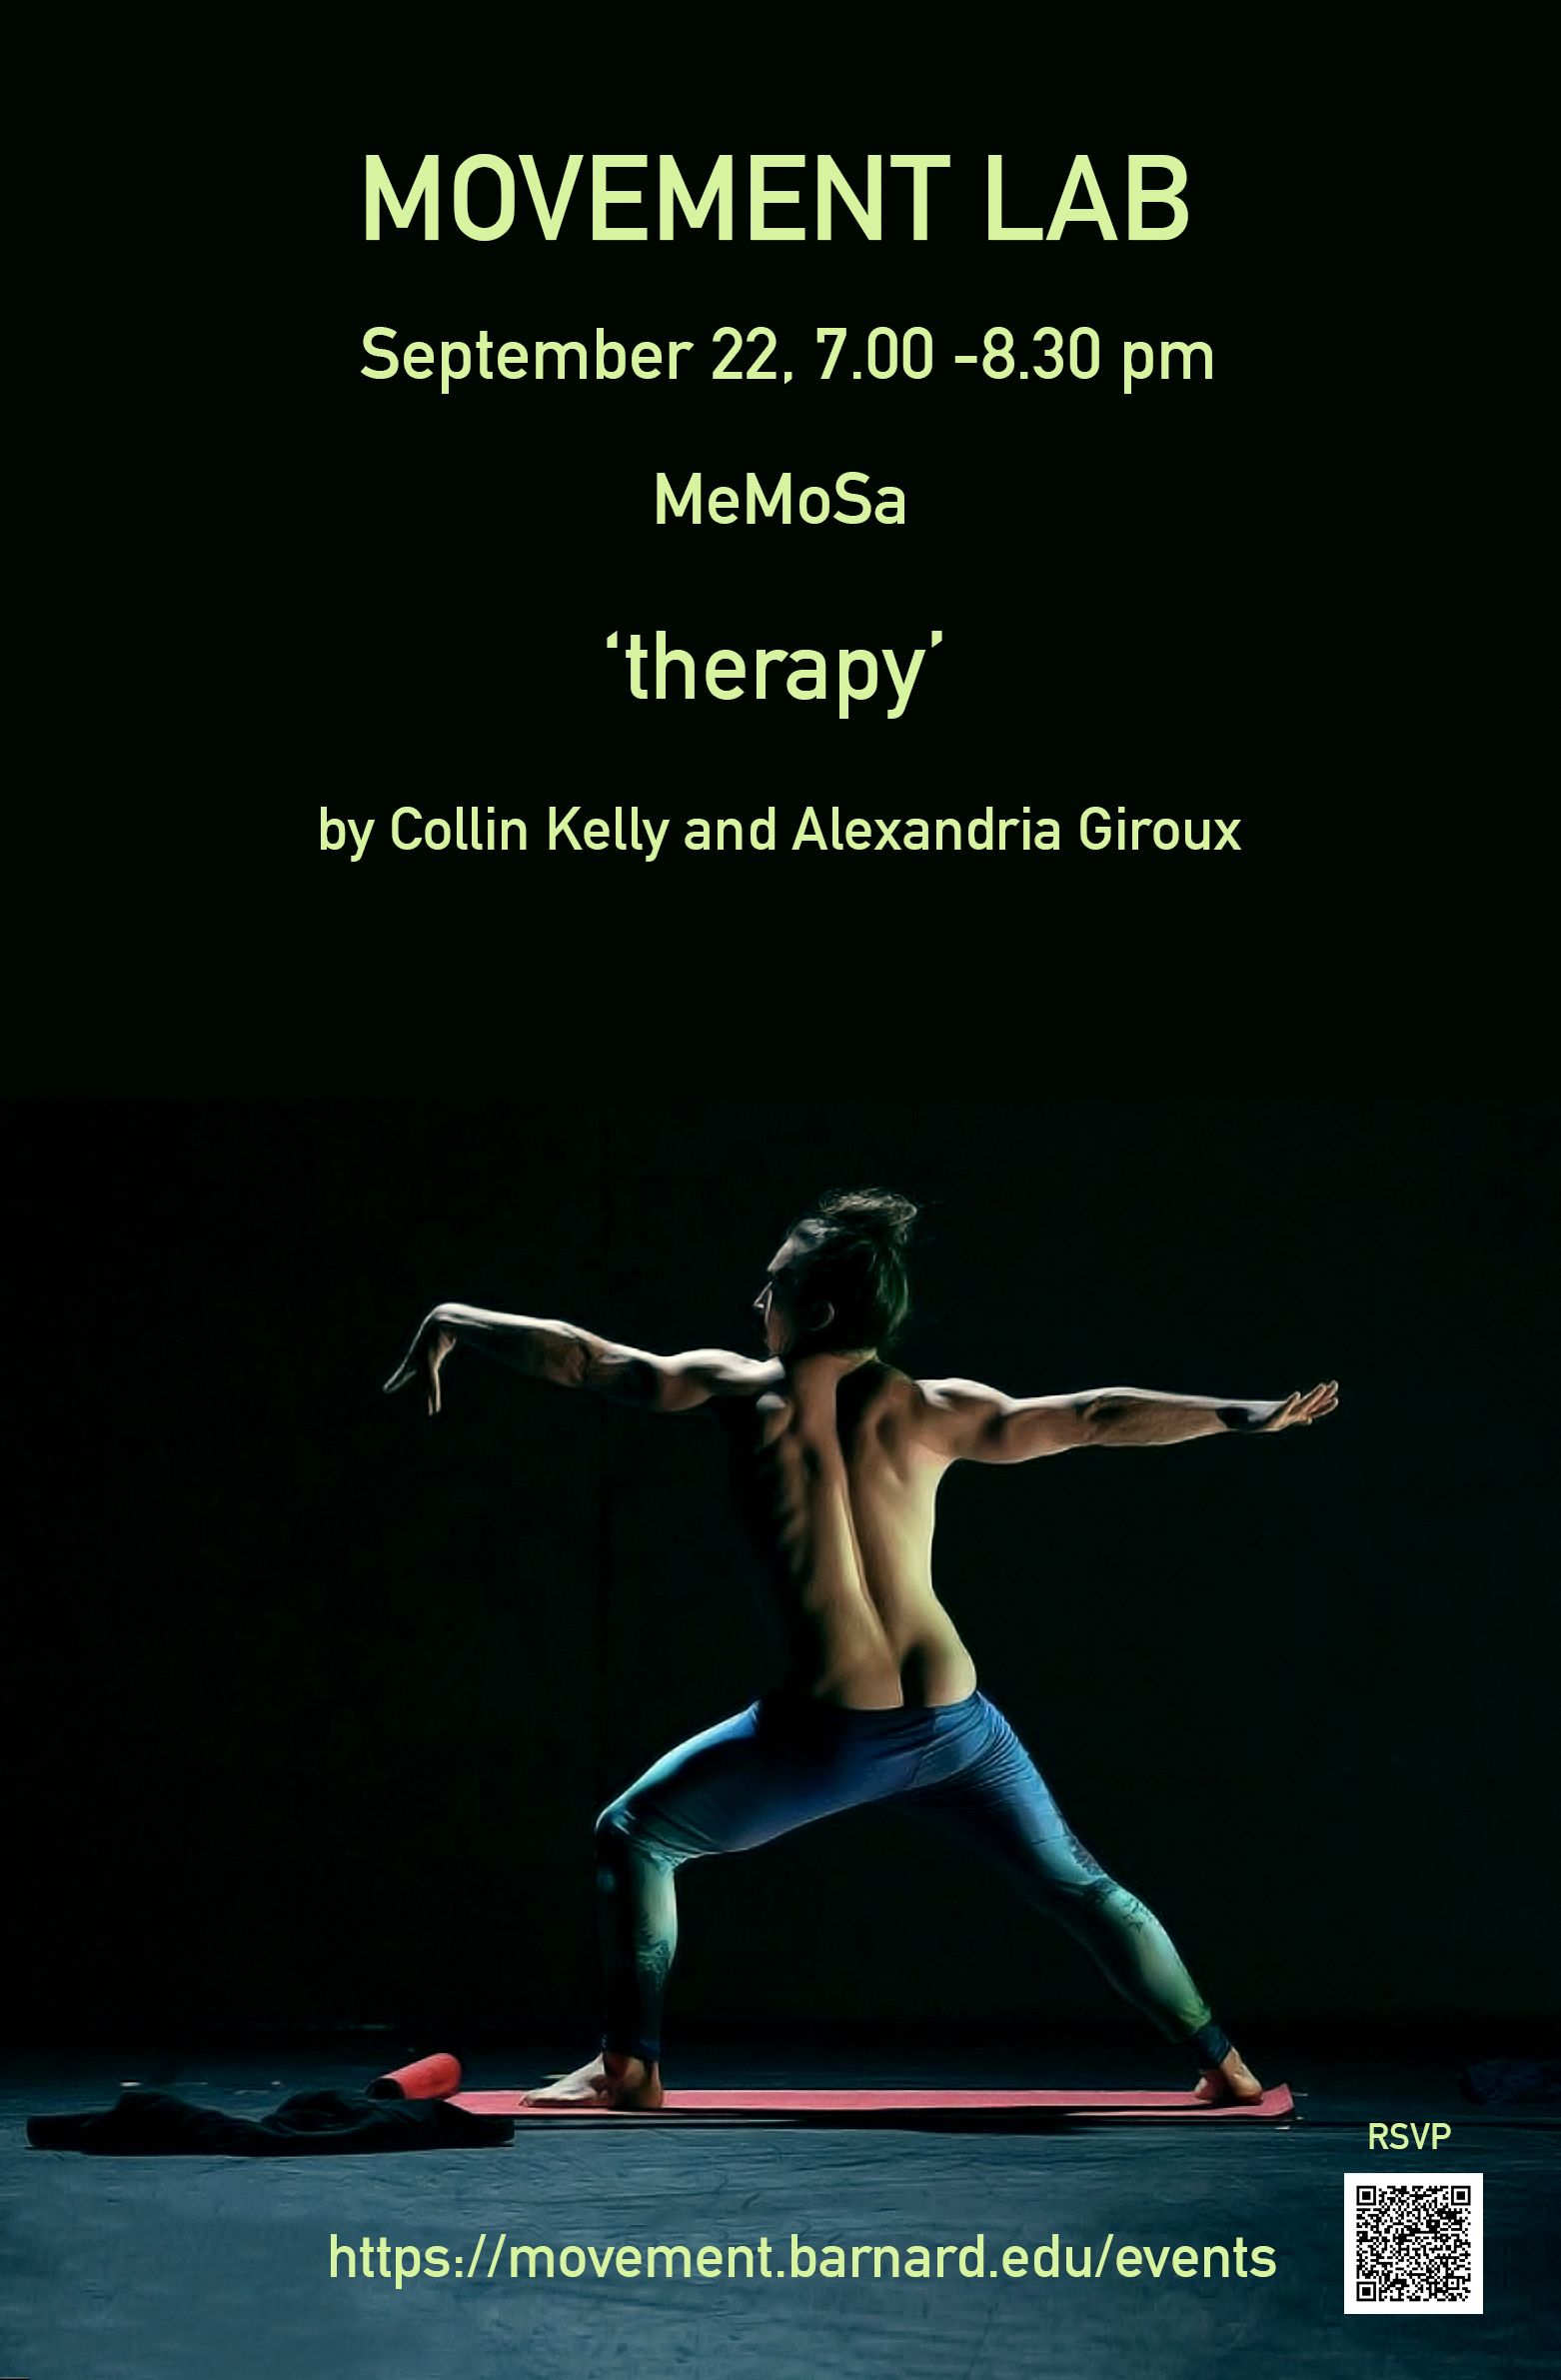 A poster publicizing Collin Kelly's MeMoSa featuring a picture of Collin Kelly shirtless doing yoga